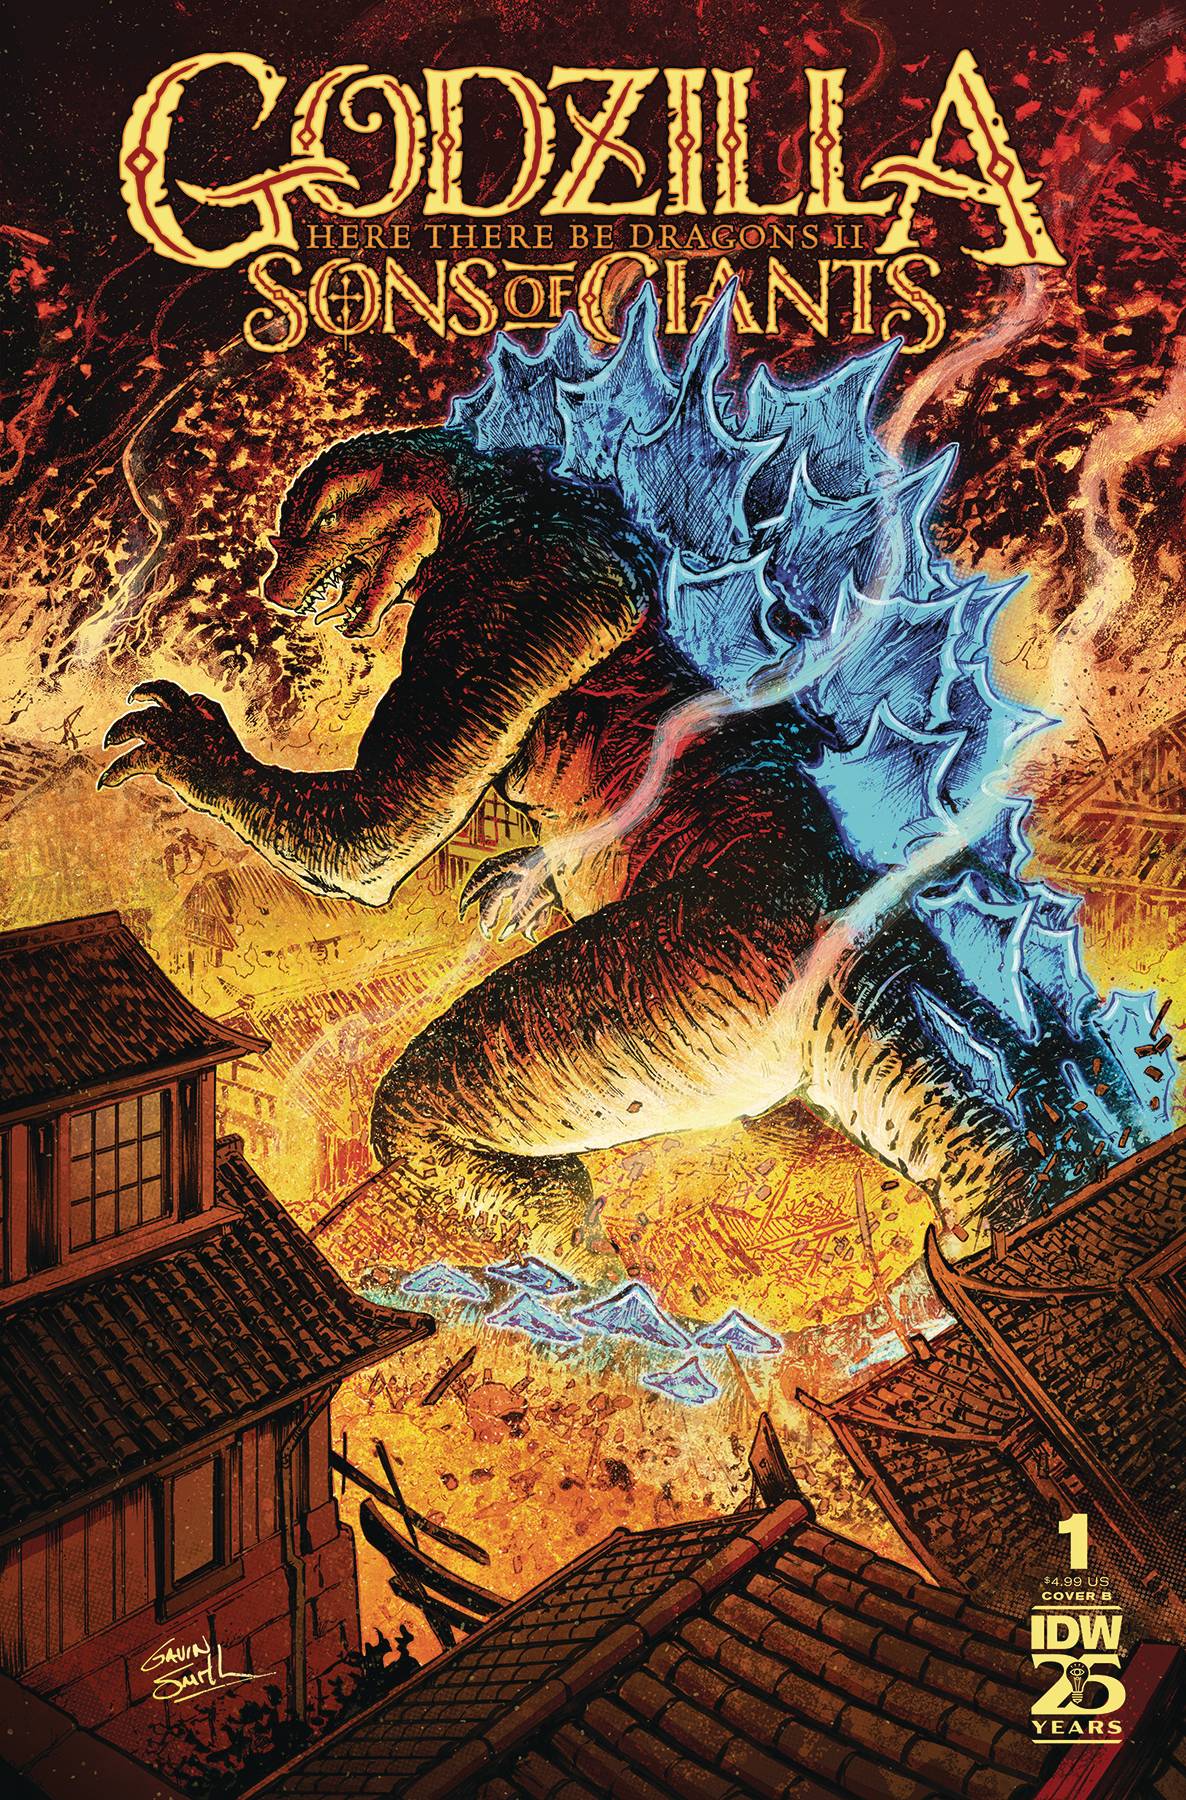 GODZILLA HERE THERE BE DRAGONS II SONS OF GIANTS #1 CVR B SM